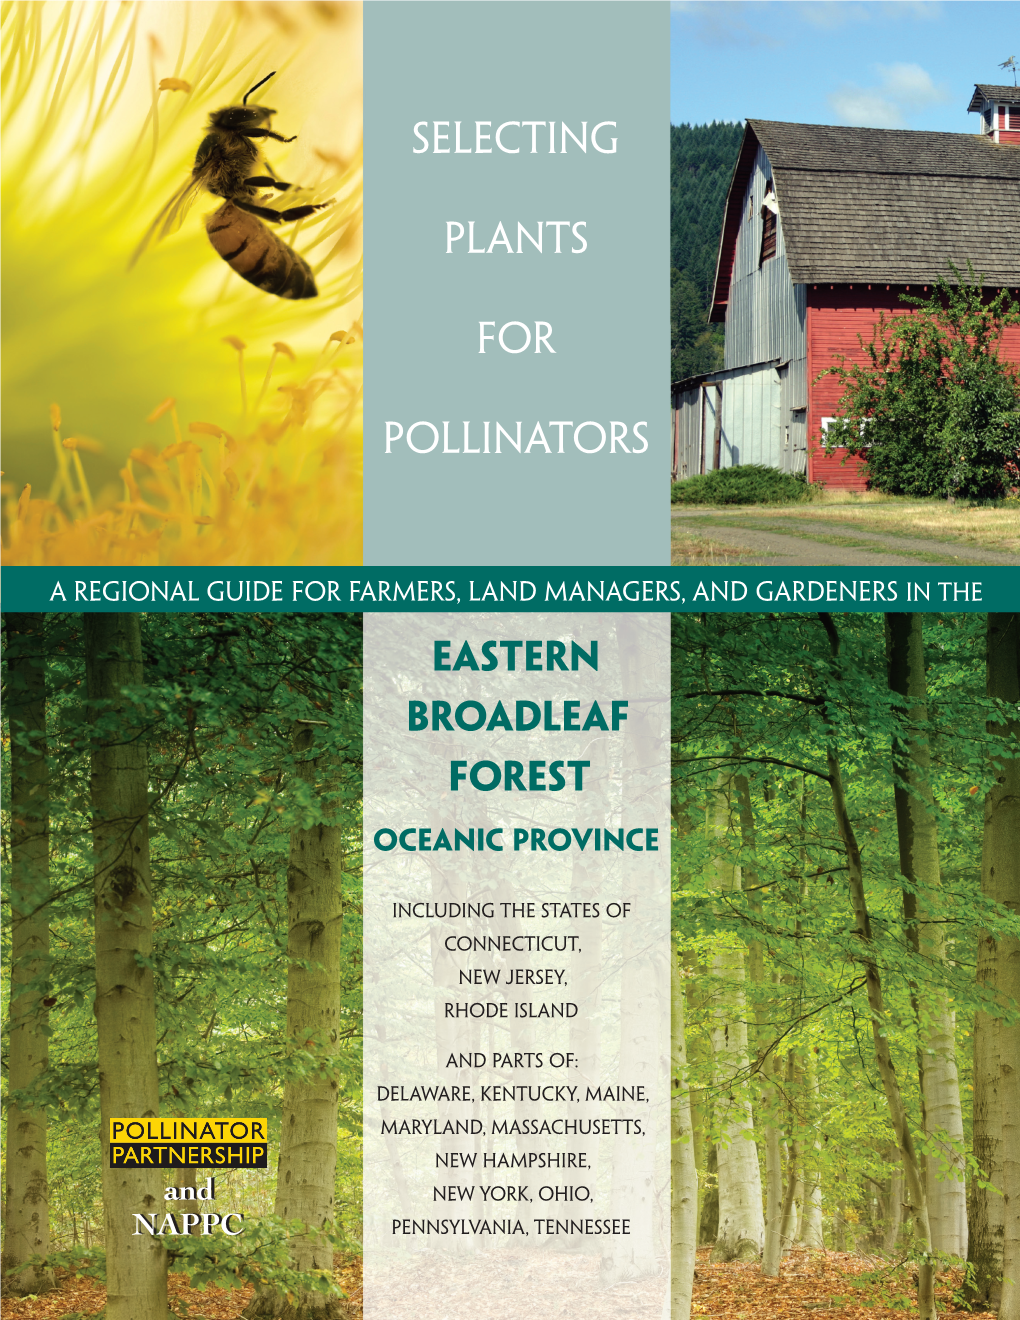 Eastern Broadleaf Forest, Oceanic Province 3 Why Support Pollinators?